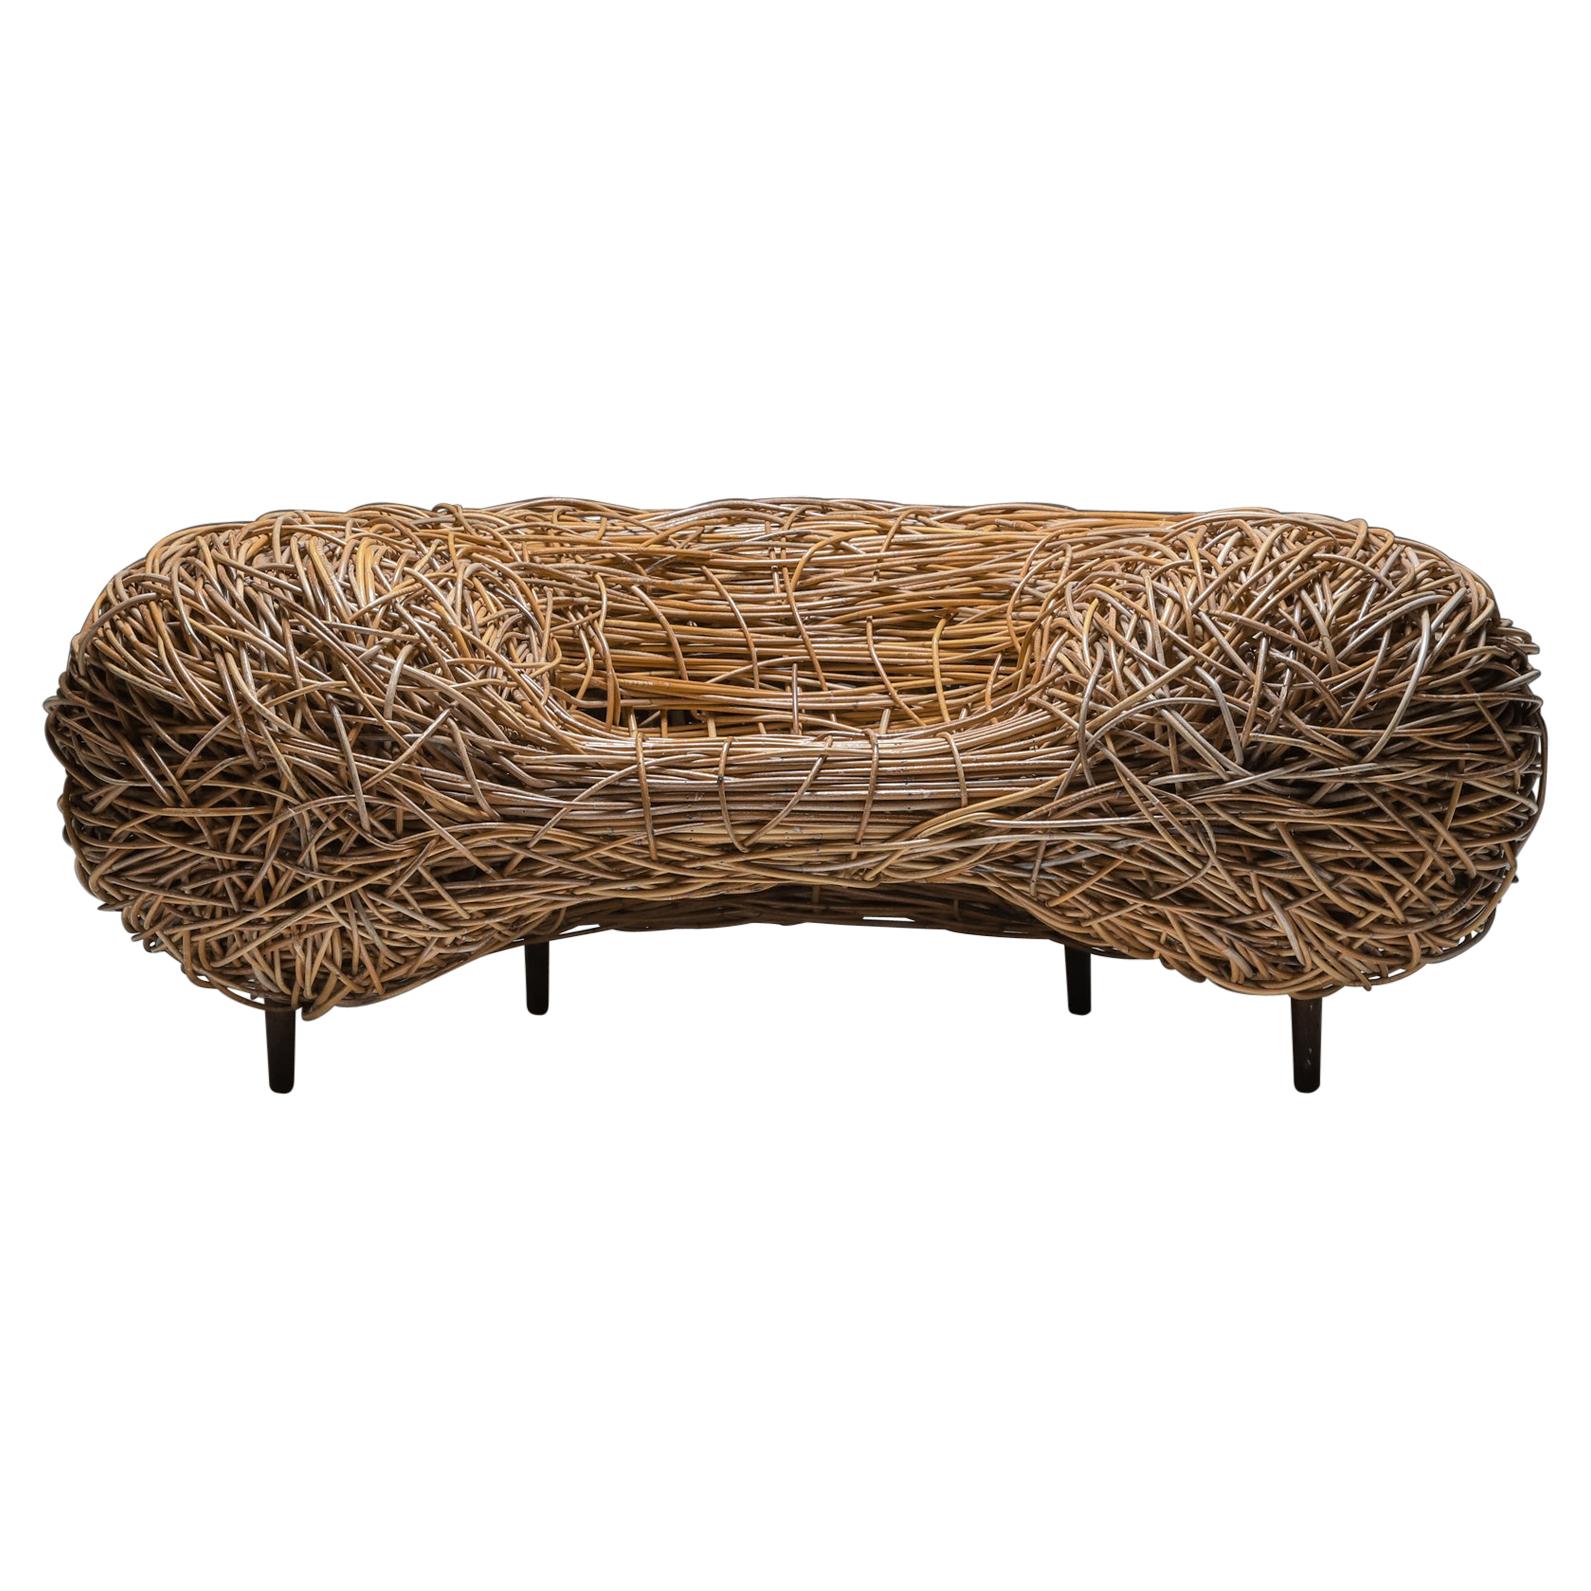 Rattan Easy Chair in the Style of Campana Brothers & Porky Hefer